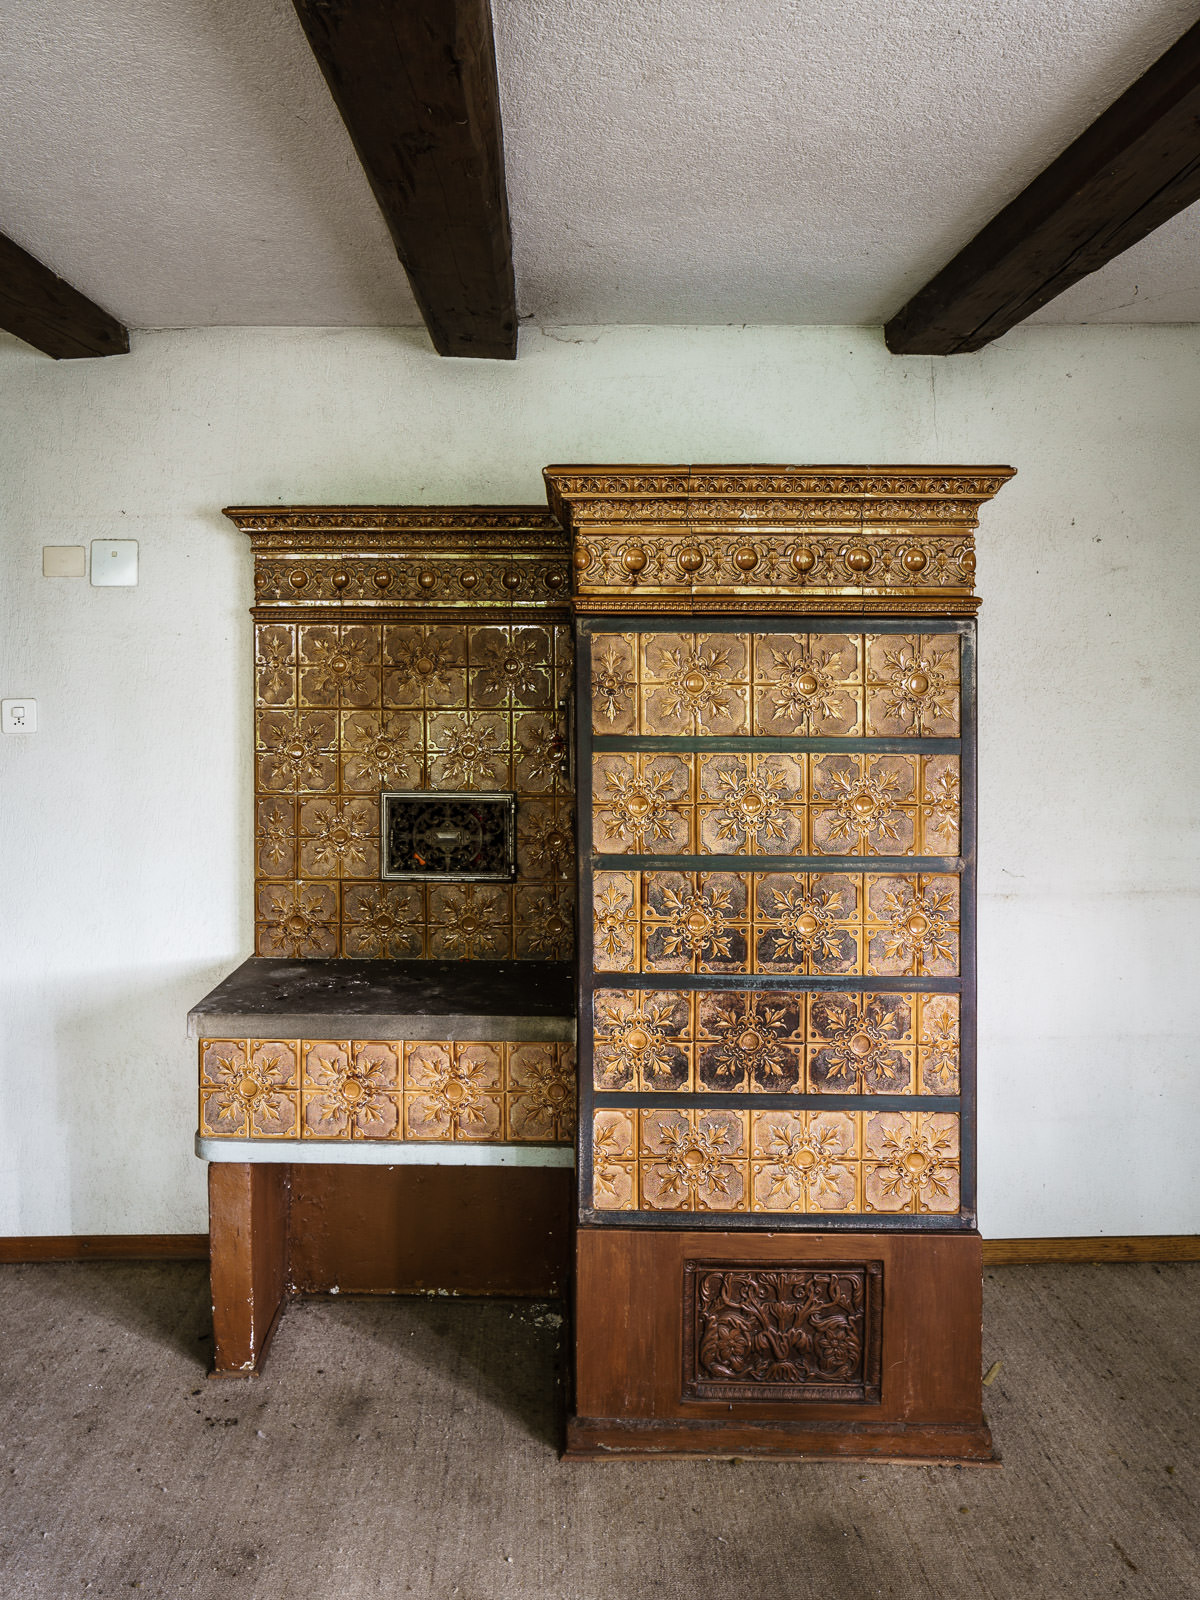 Old, historic stove in protected landmark / cultural heritage building in Switzerland.